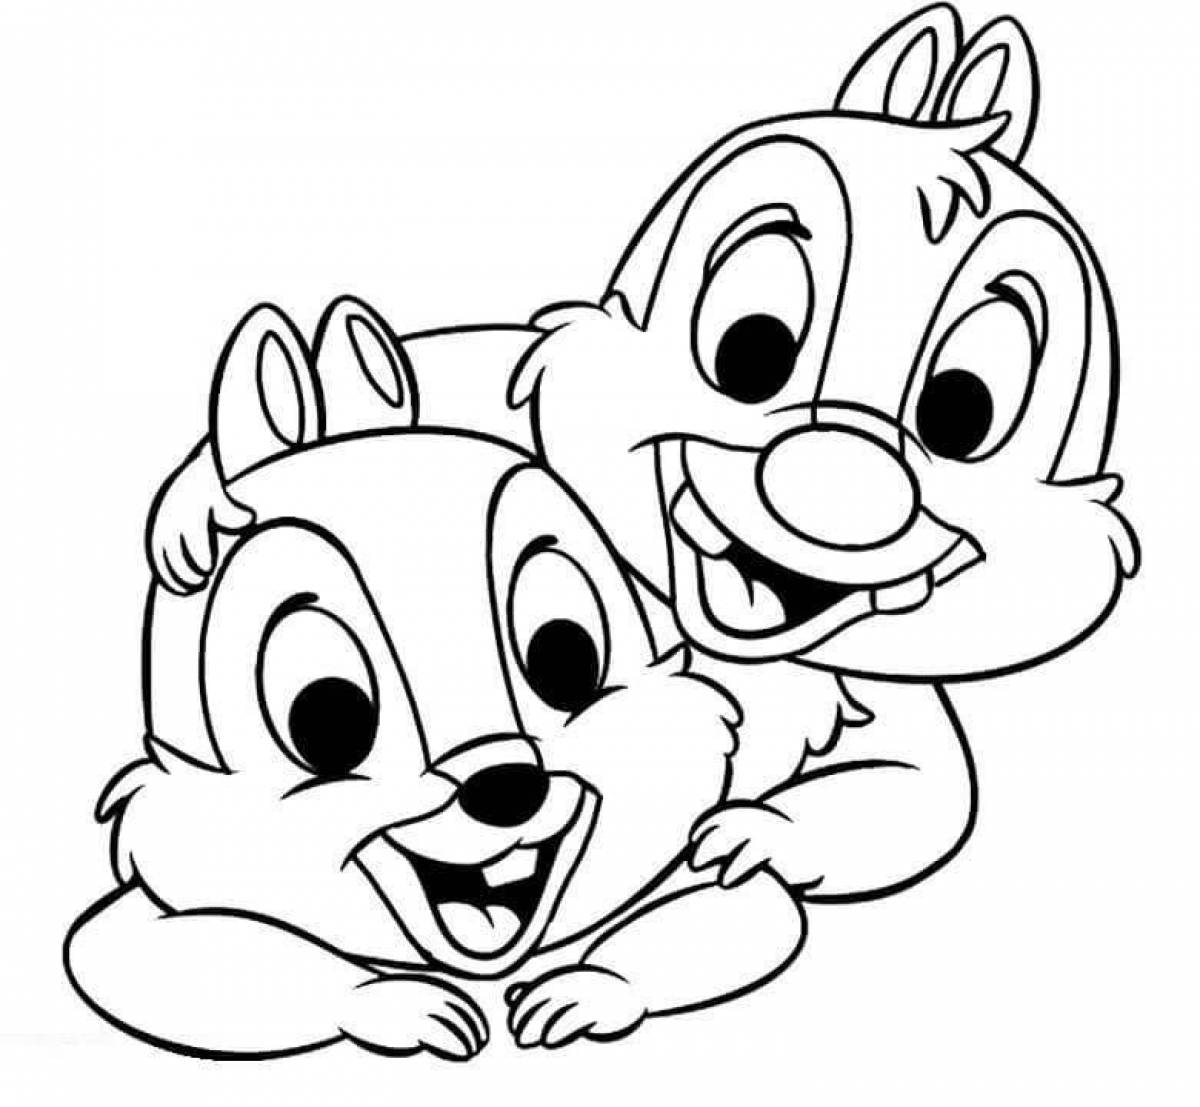 Playable coloring chip and dale